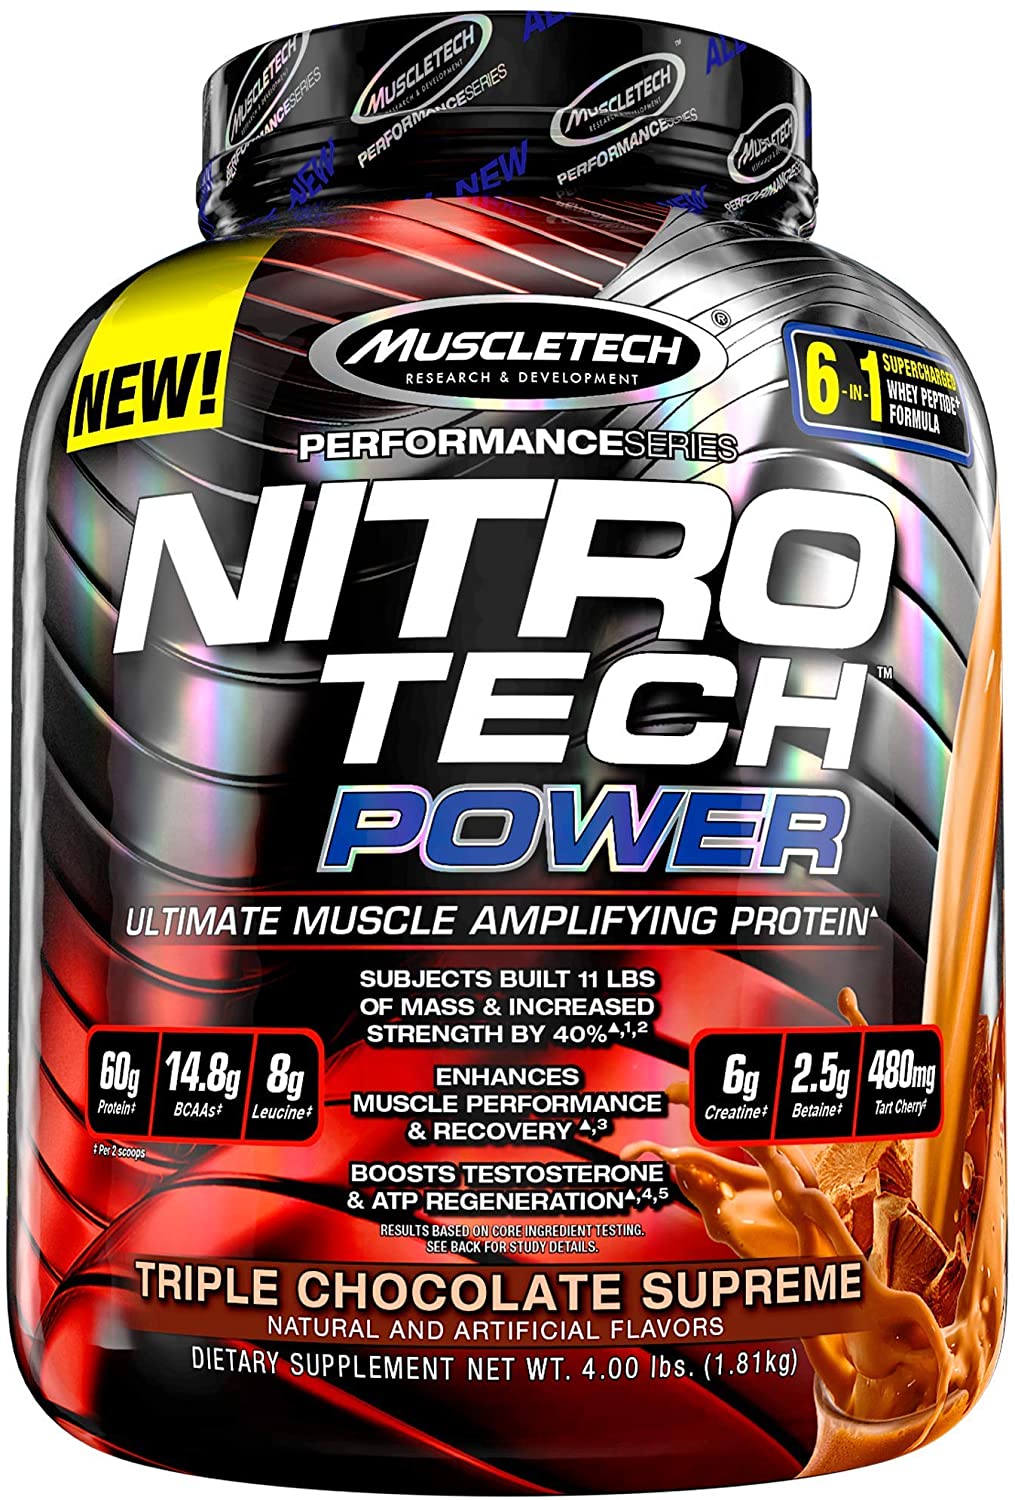 MuscleTech Nitro-Tech Power (4 Lbs) Whey Protein Powder Ultimate Muscle-Building Shake Supplement Protein  BCAA and Creatine INCREASED MUSCLE STRENGTH TESTOSTERONE SUPPORT เวย์โปรตีน บีซีเอเอ ครีเอทีน สร้างกล้าม